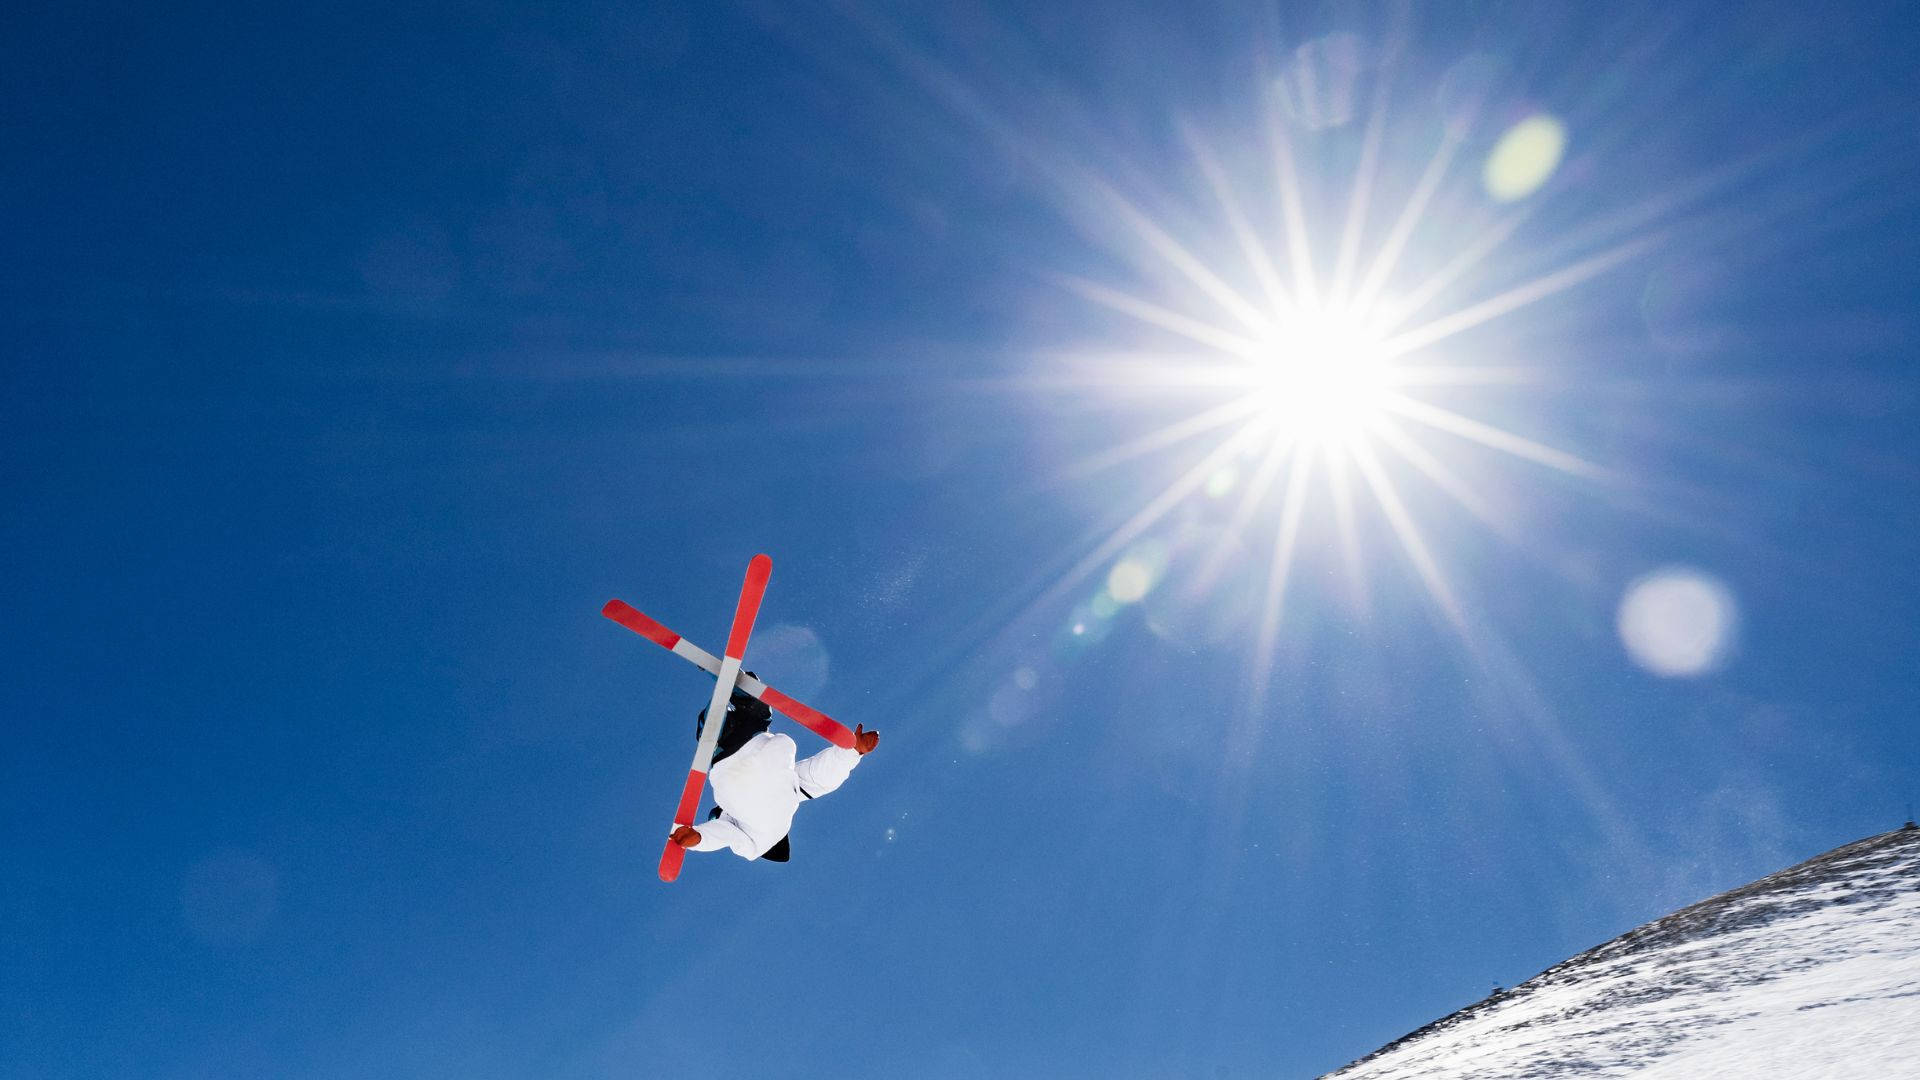 A Thrilling Mid-air Ski Jumping Moment Background